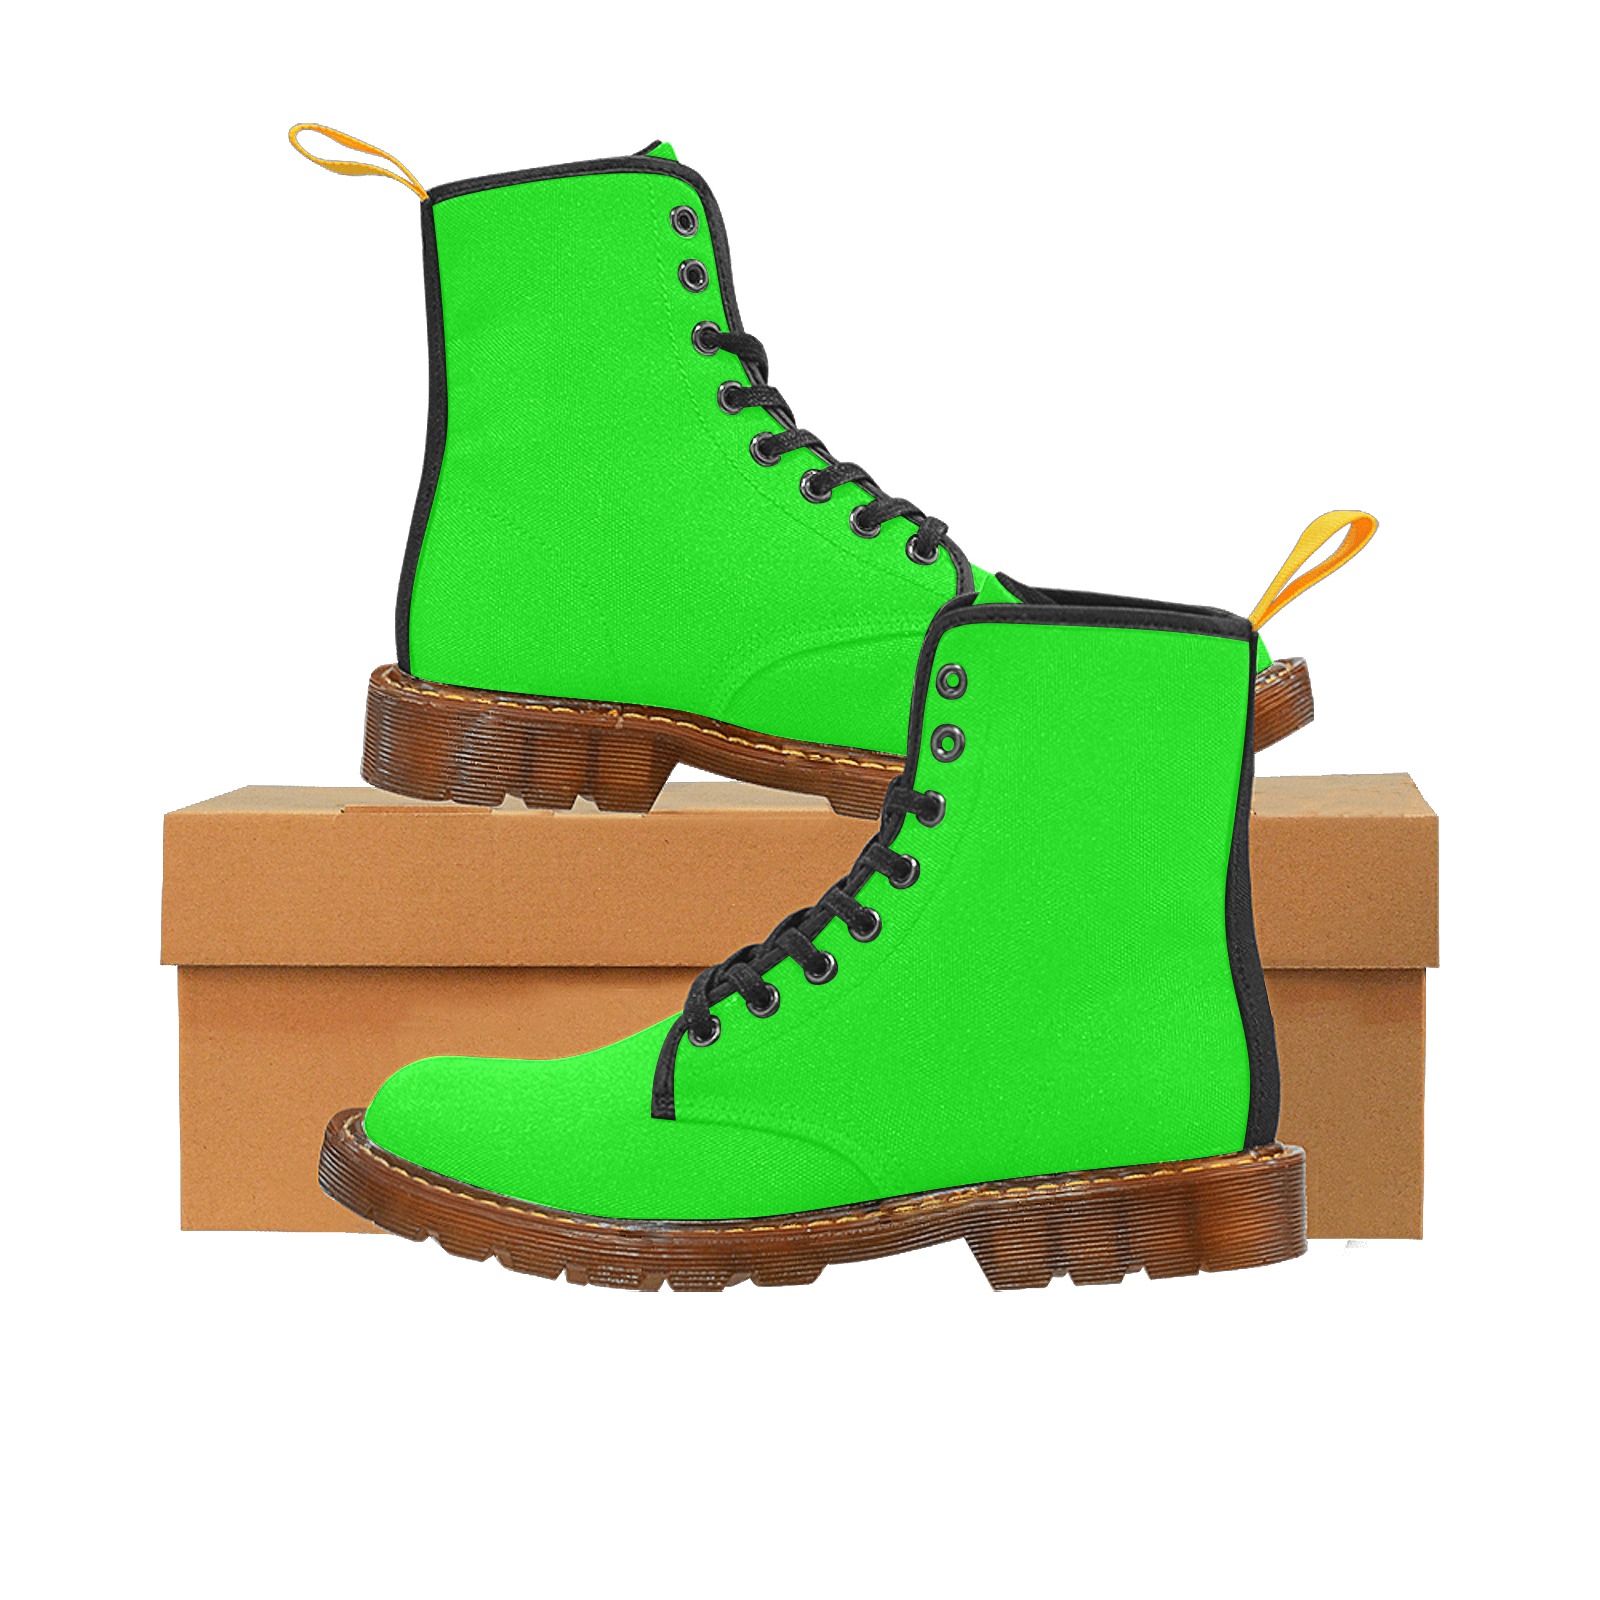 Merry Christmas Green Solid Color Martin Boots For Women Model 1203H